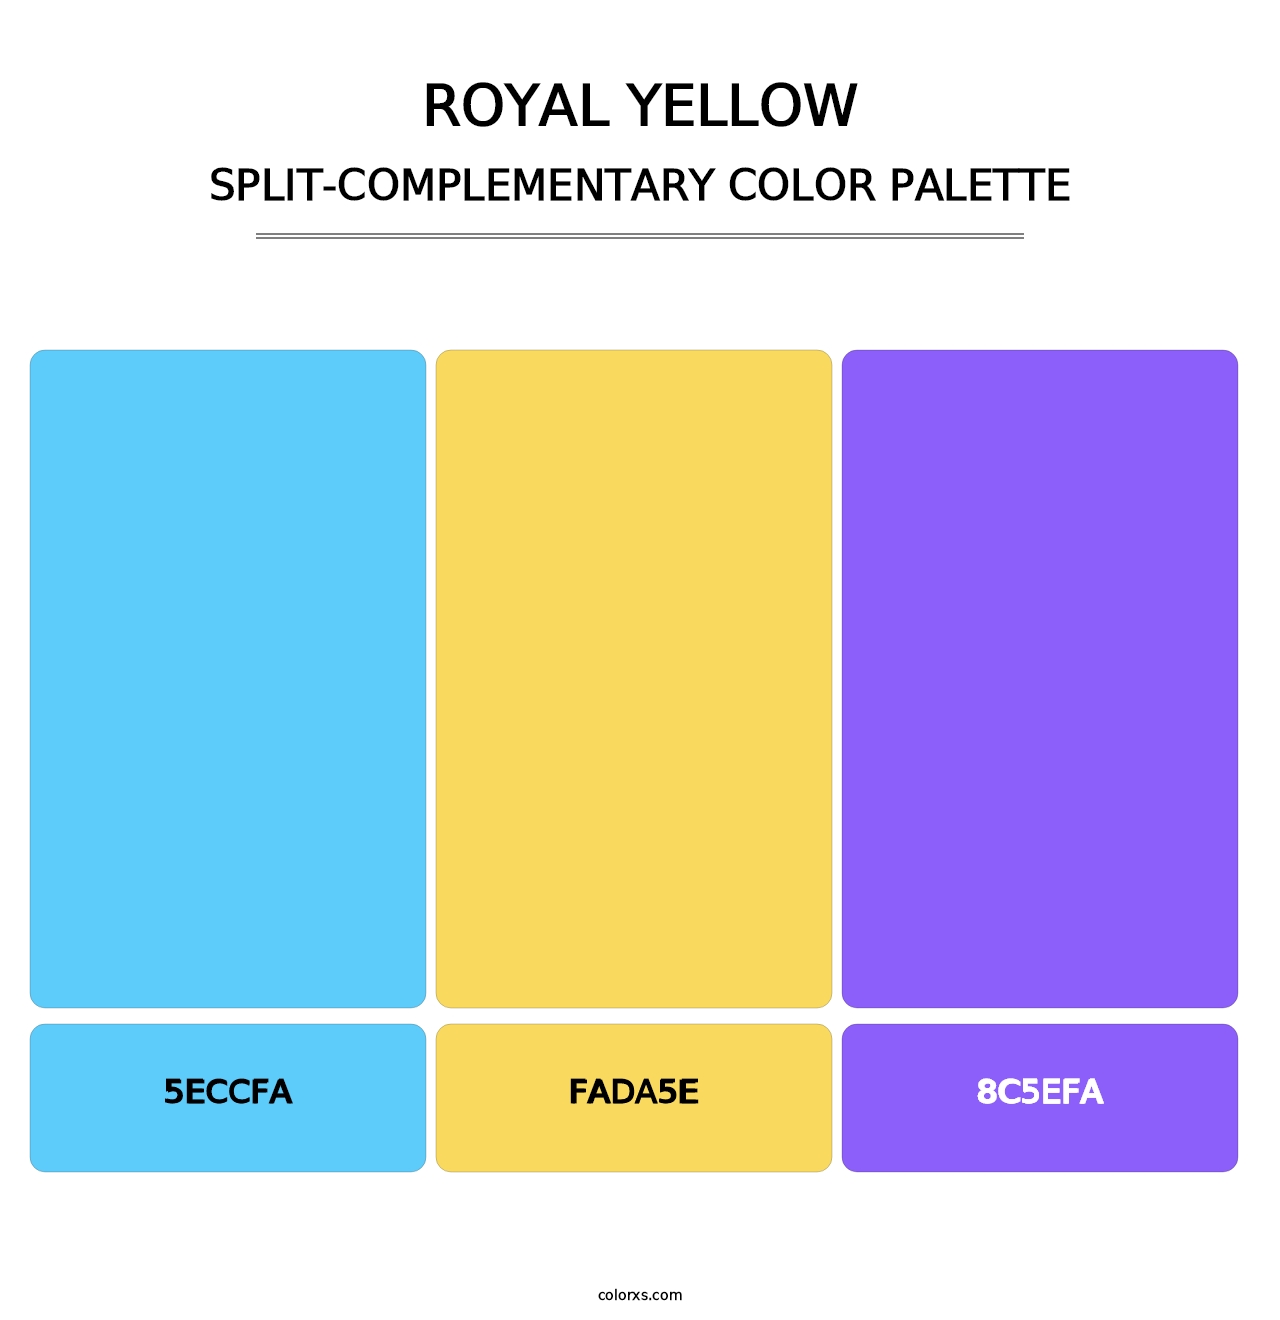 Royal Yellow - Split-Complementary Color Palette